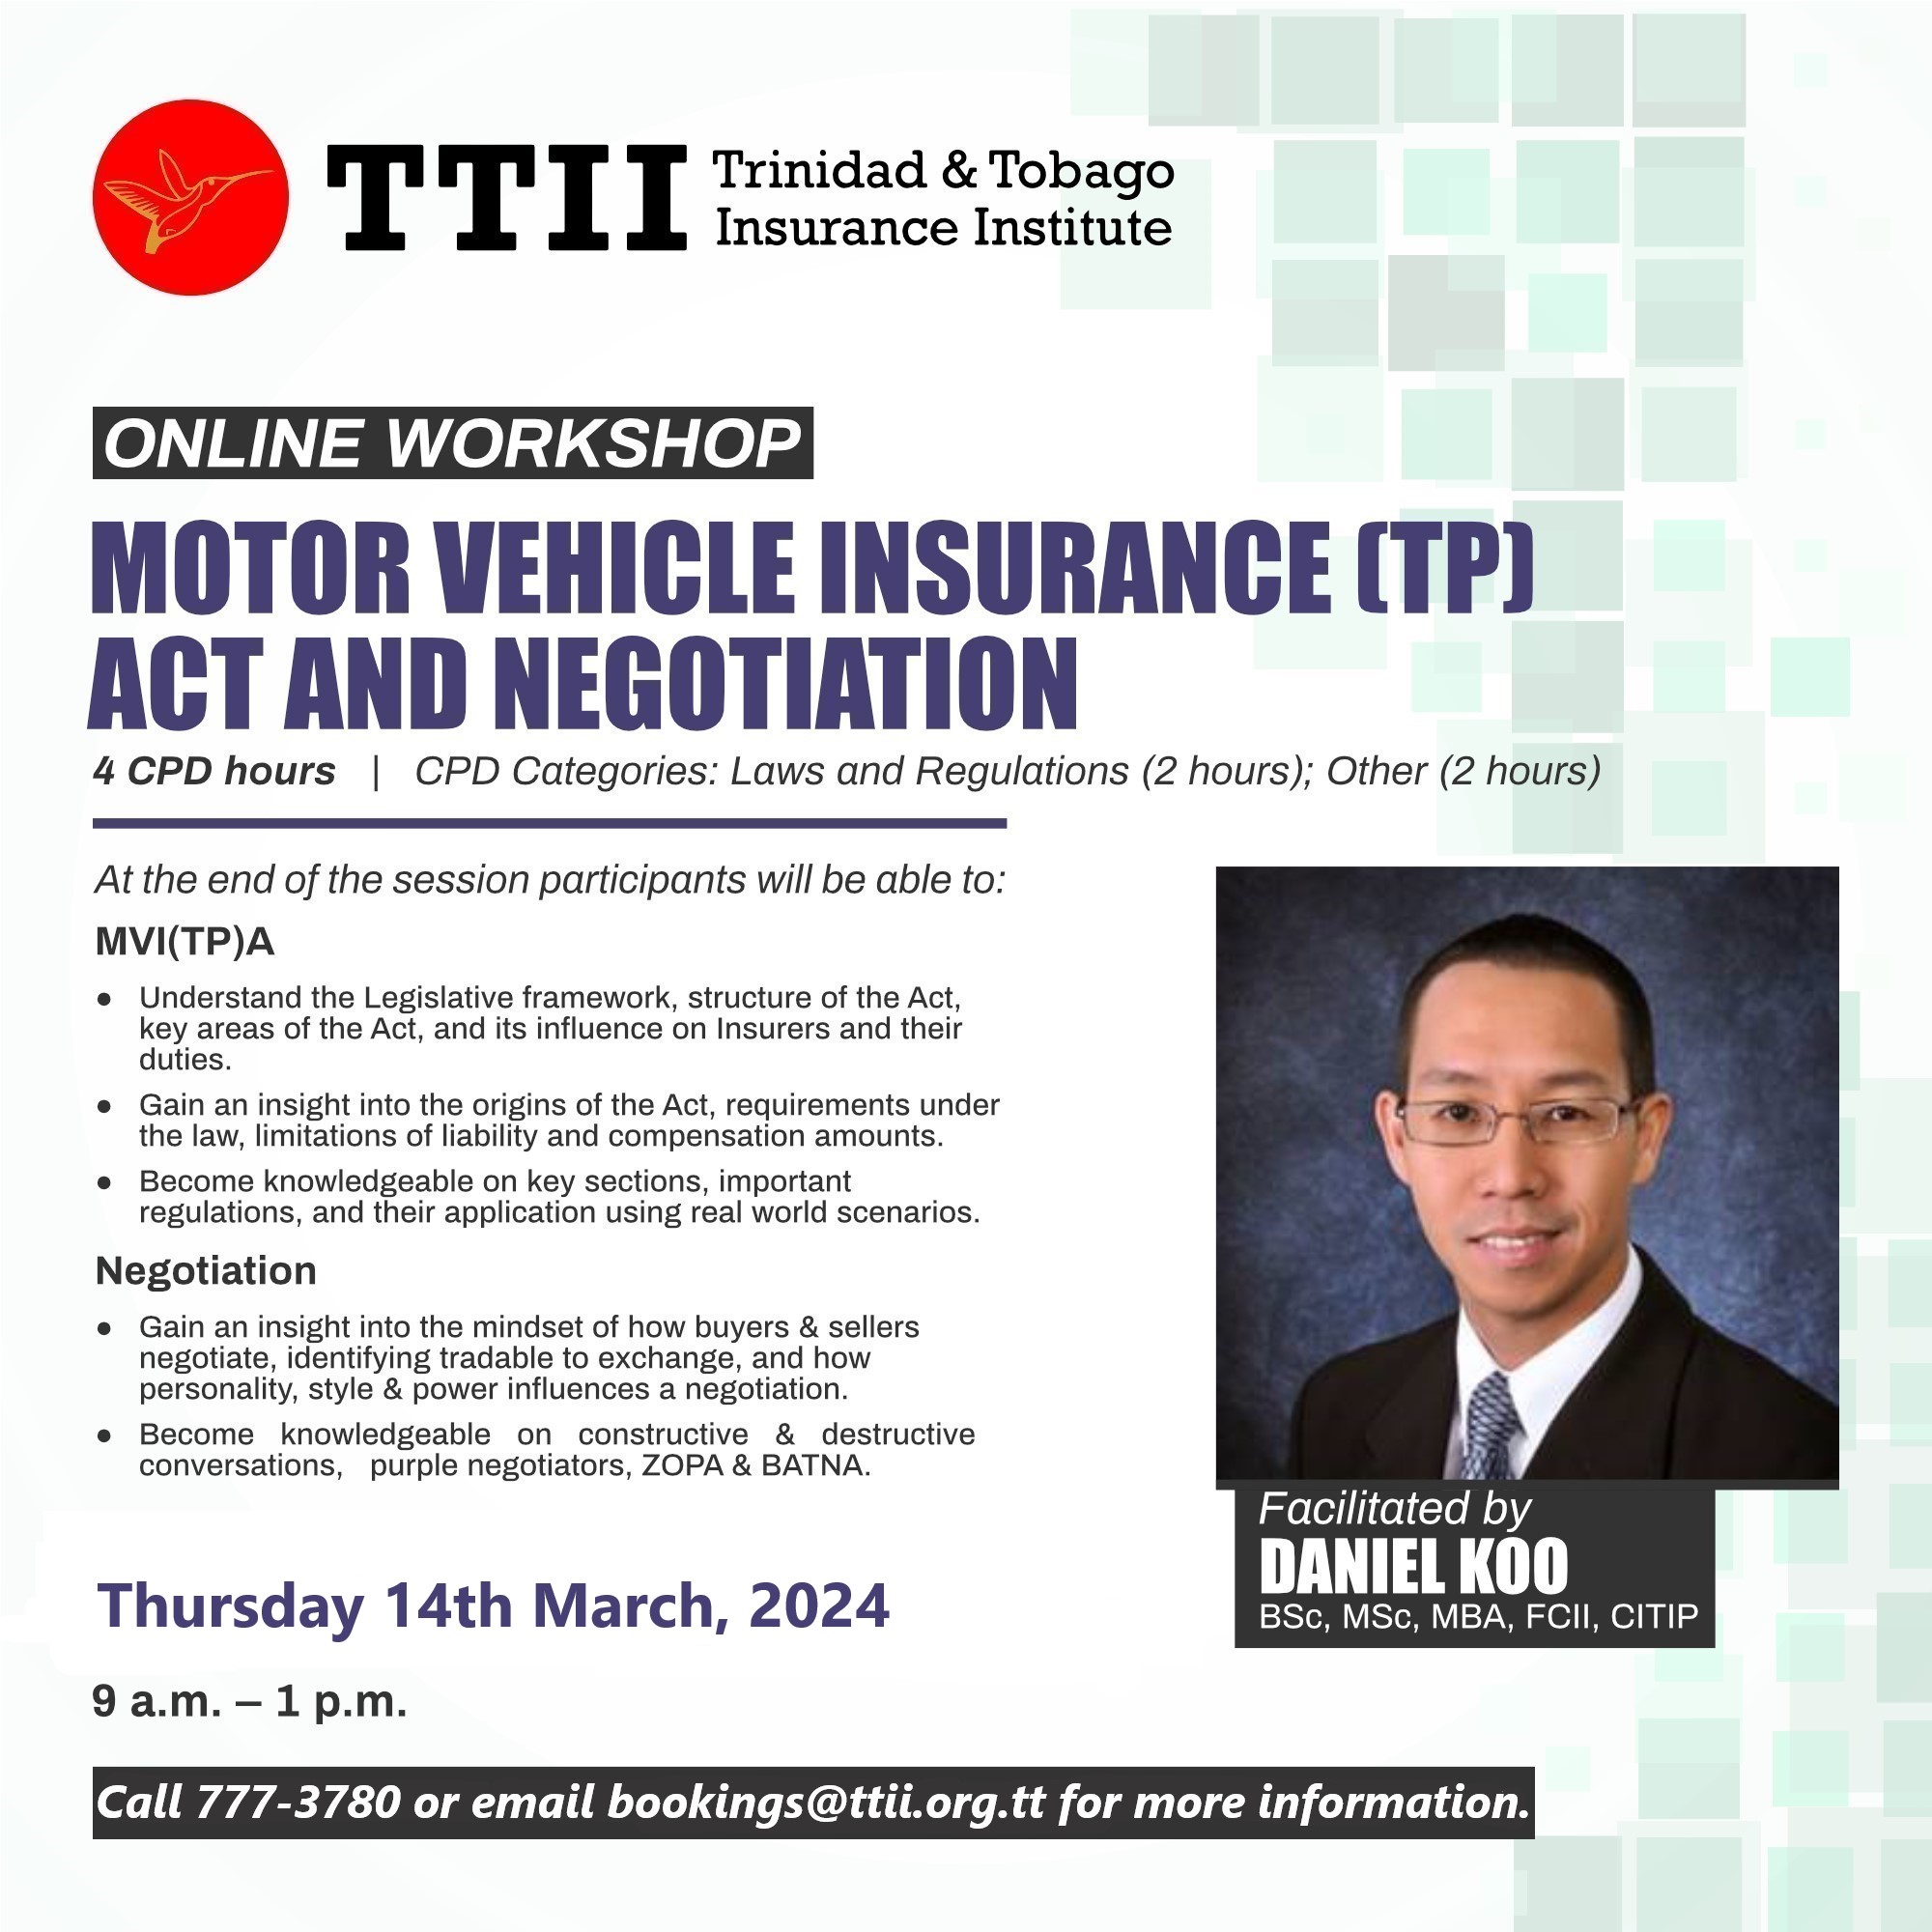 Motor Vehicle Insurance (TP) Act and Negotiation